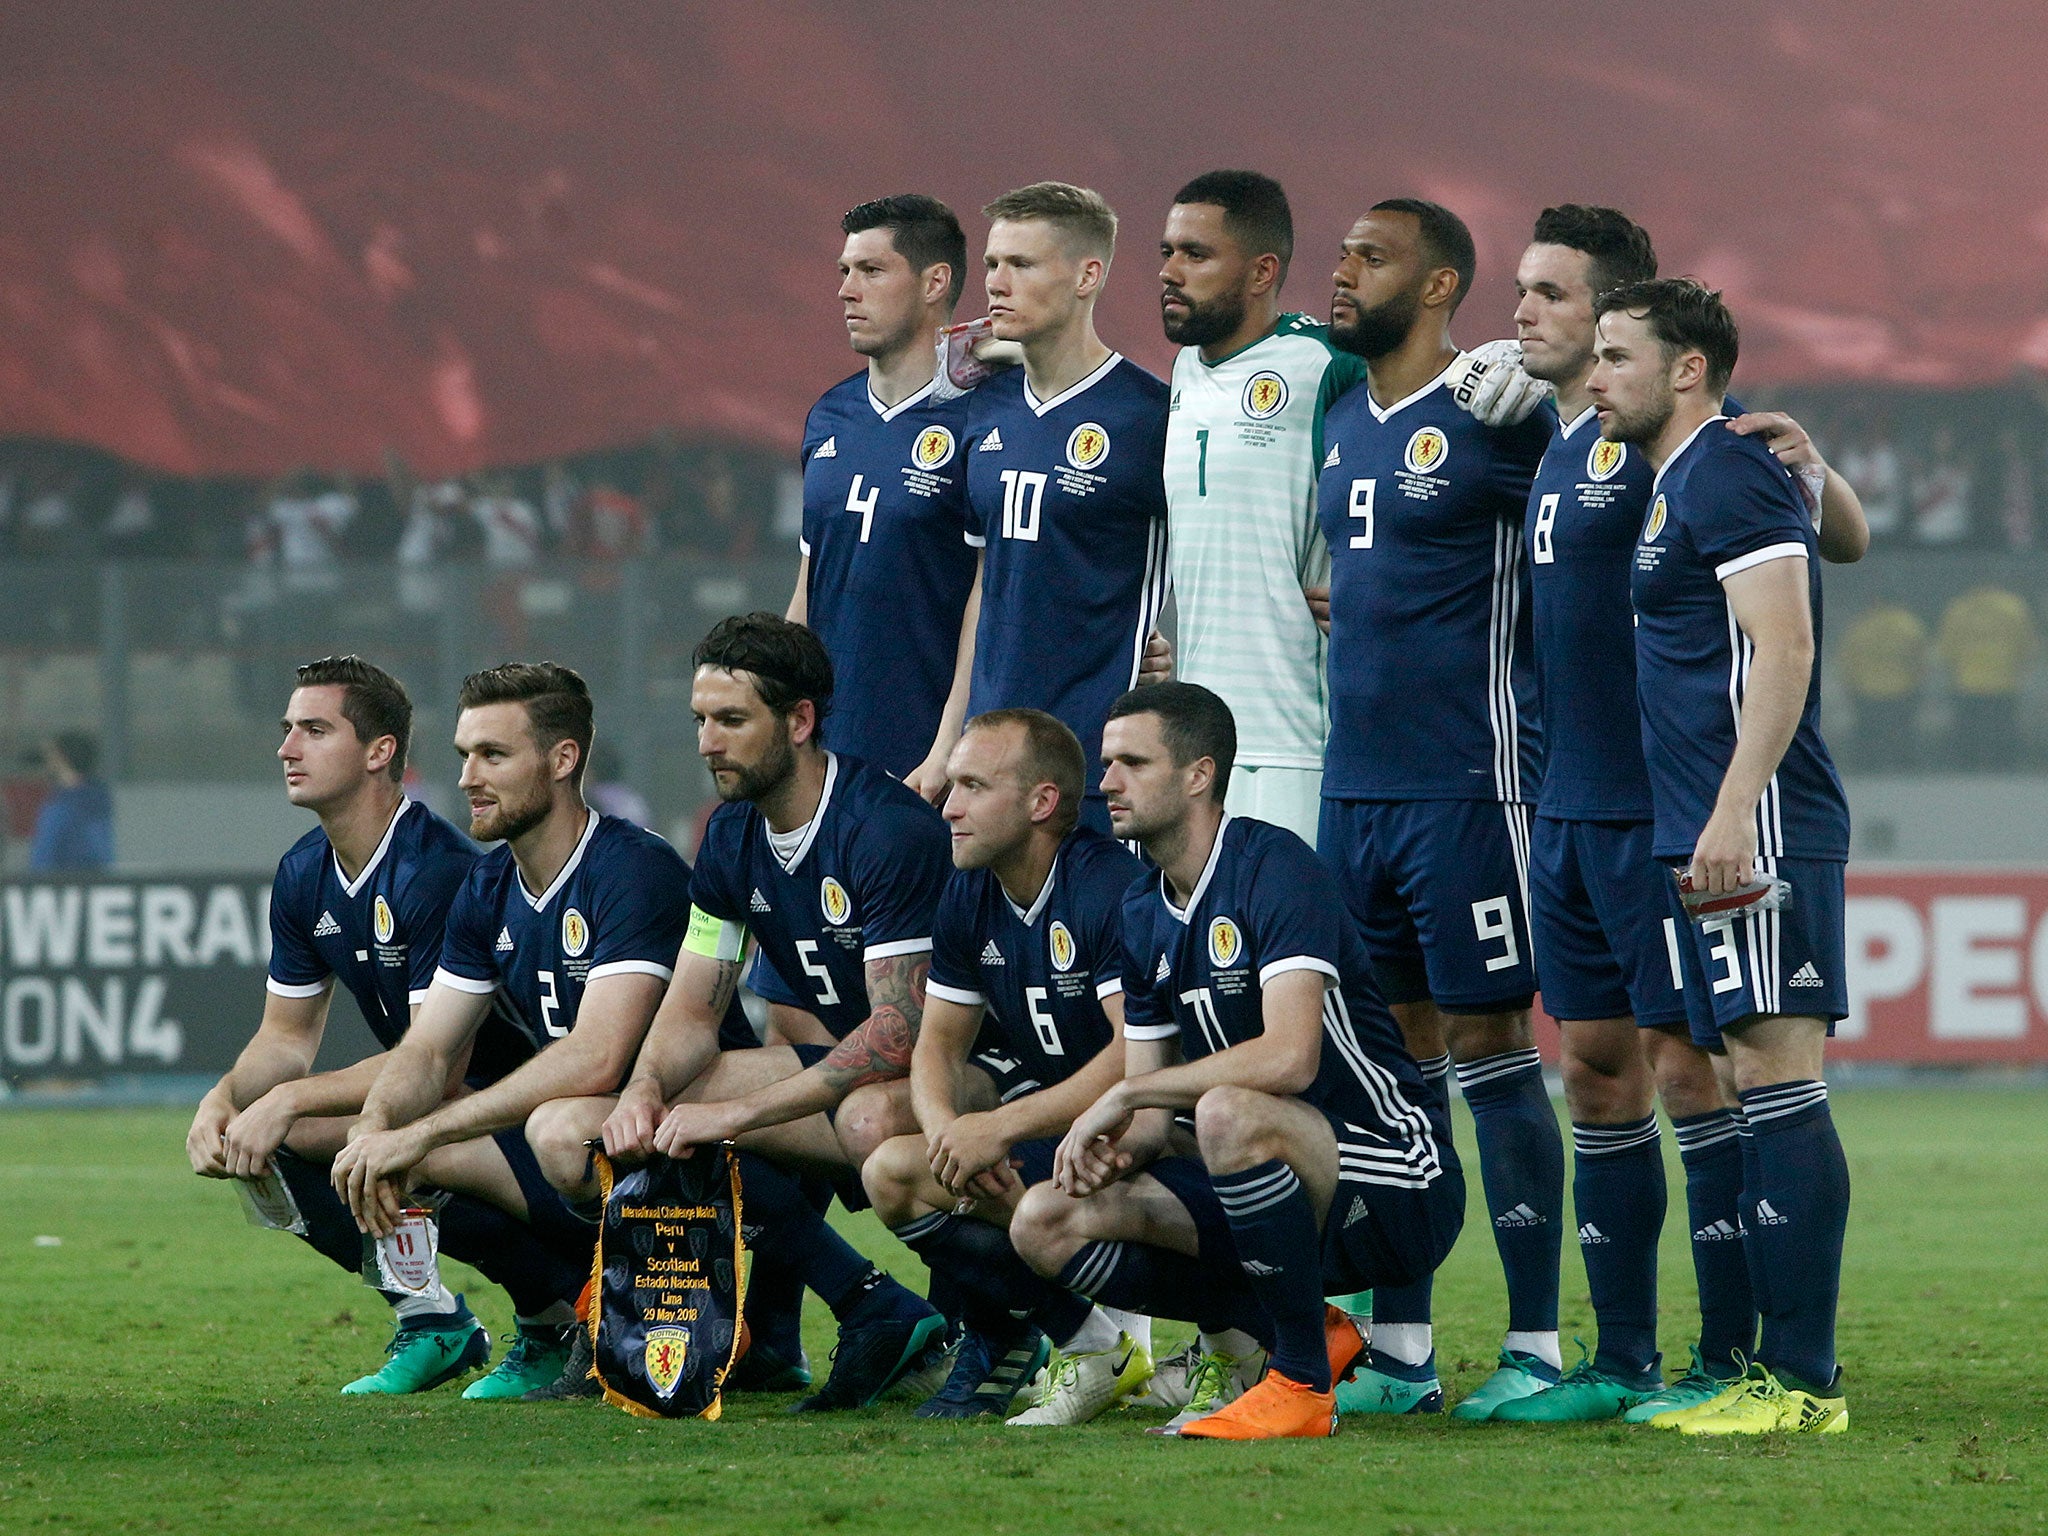 A new-look Scotland side held their own